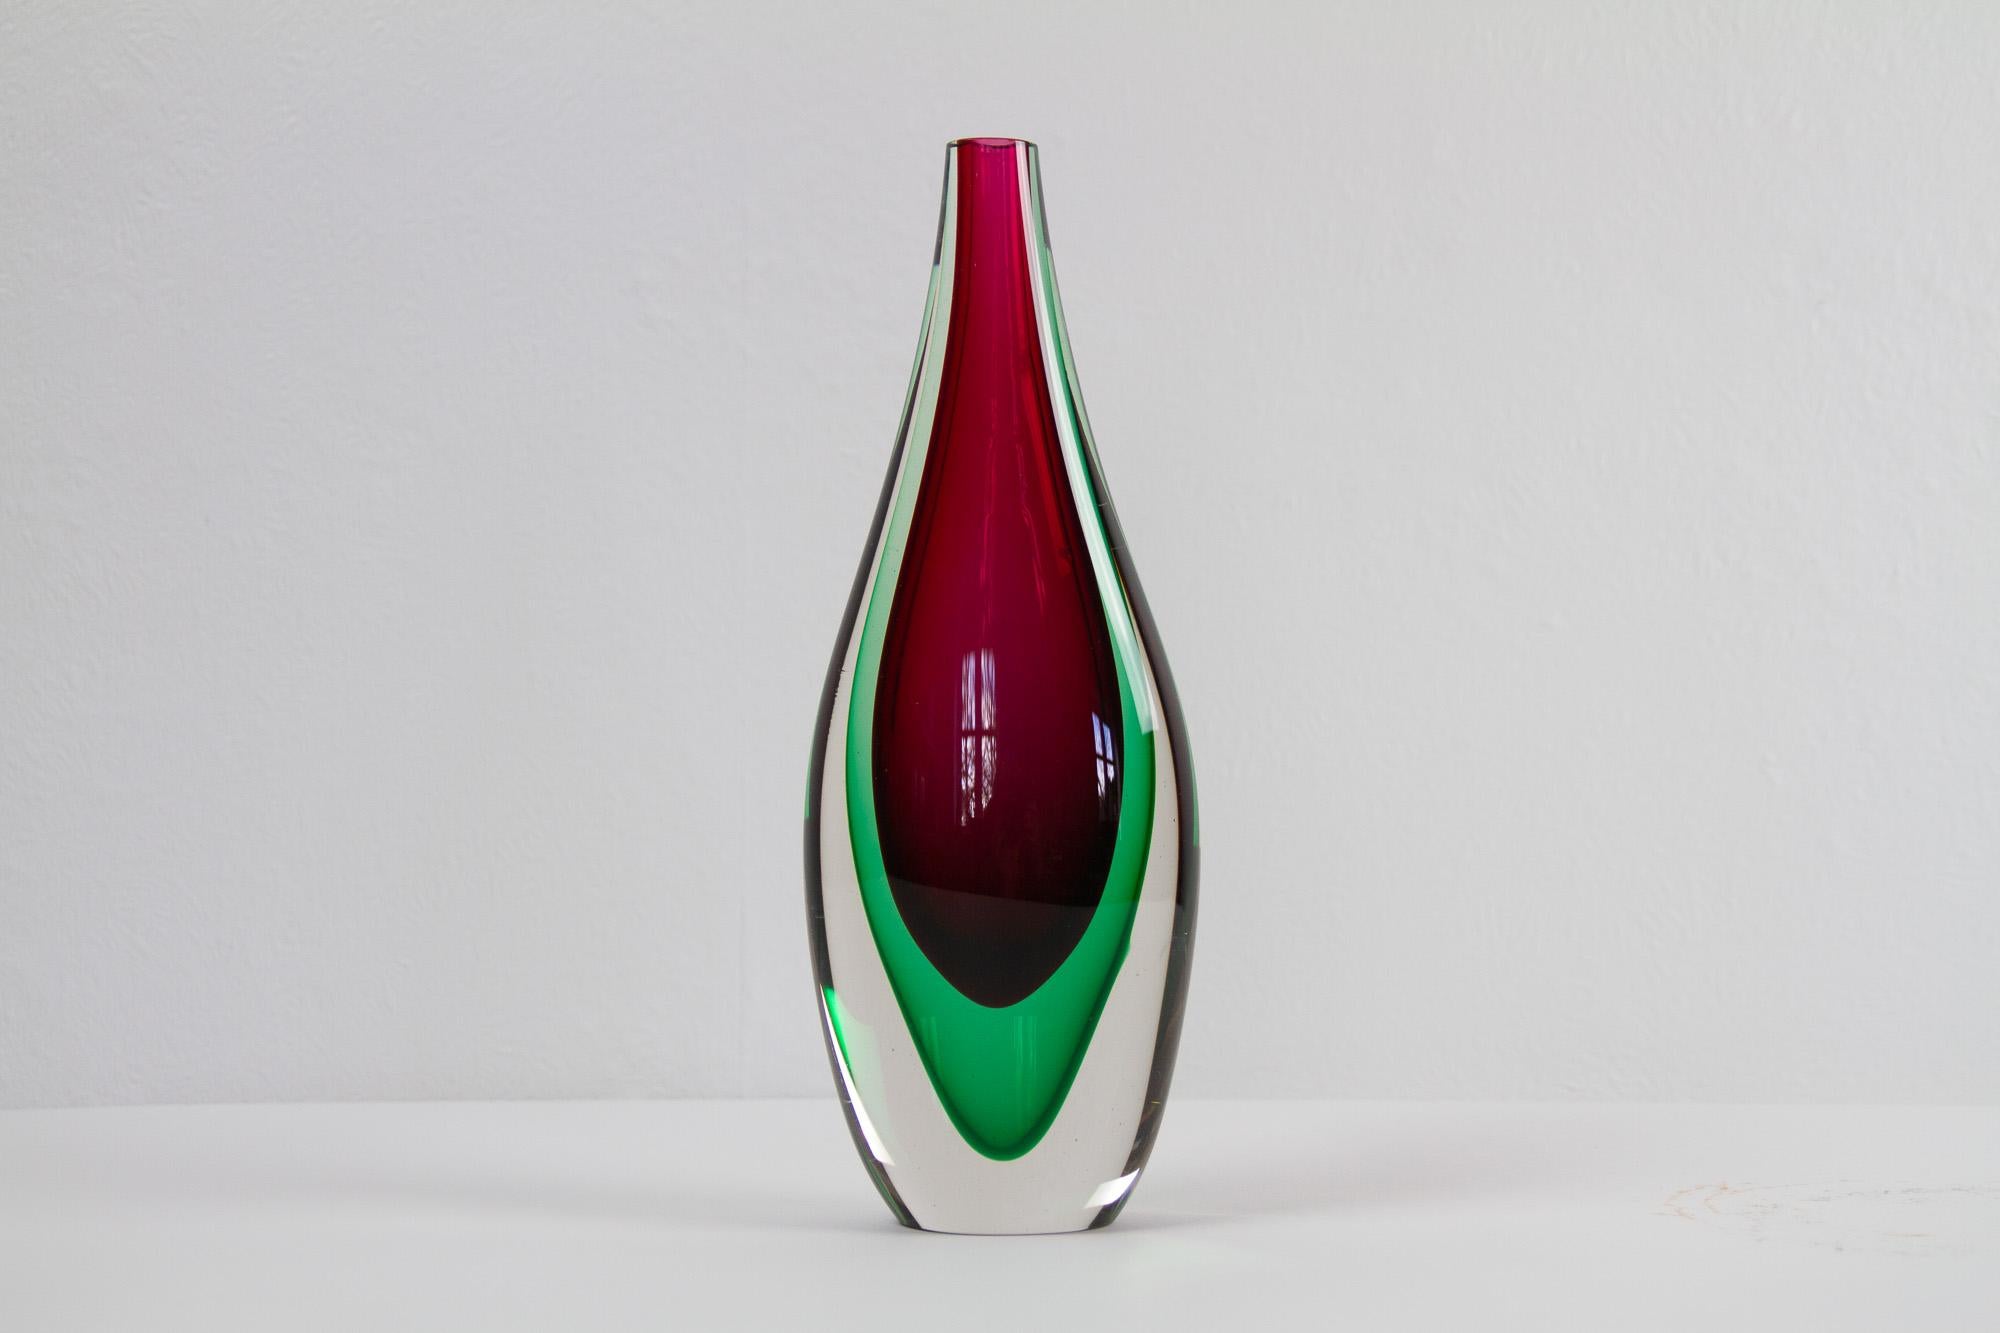 Vintage Murano Teardrop Sommerso vase 1960s
Beautiful Murano vase in clear, green and magenta glass hand blown on Murano Island by using the Sommerso technique of layering different colors of glass.
Height 28 cm.
Excellent vintage condition with